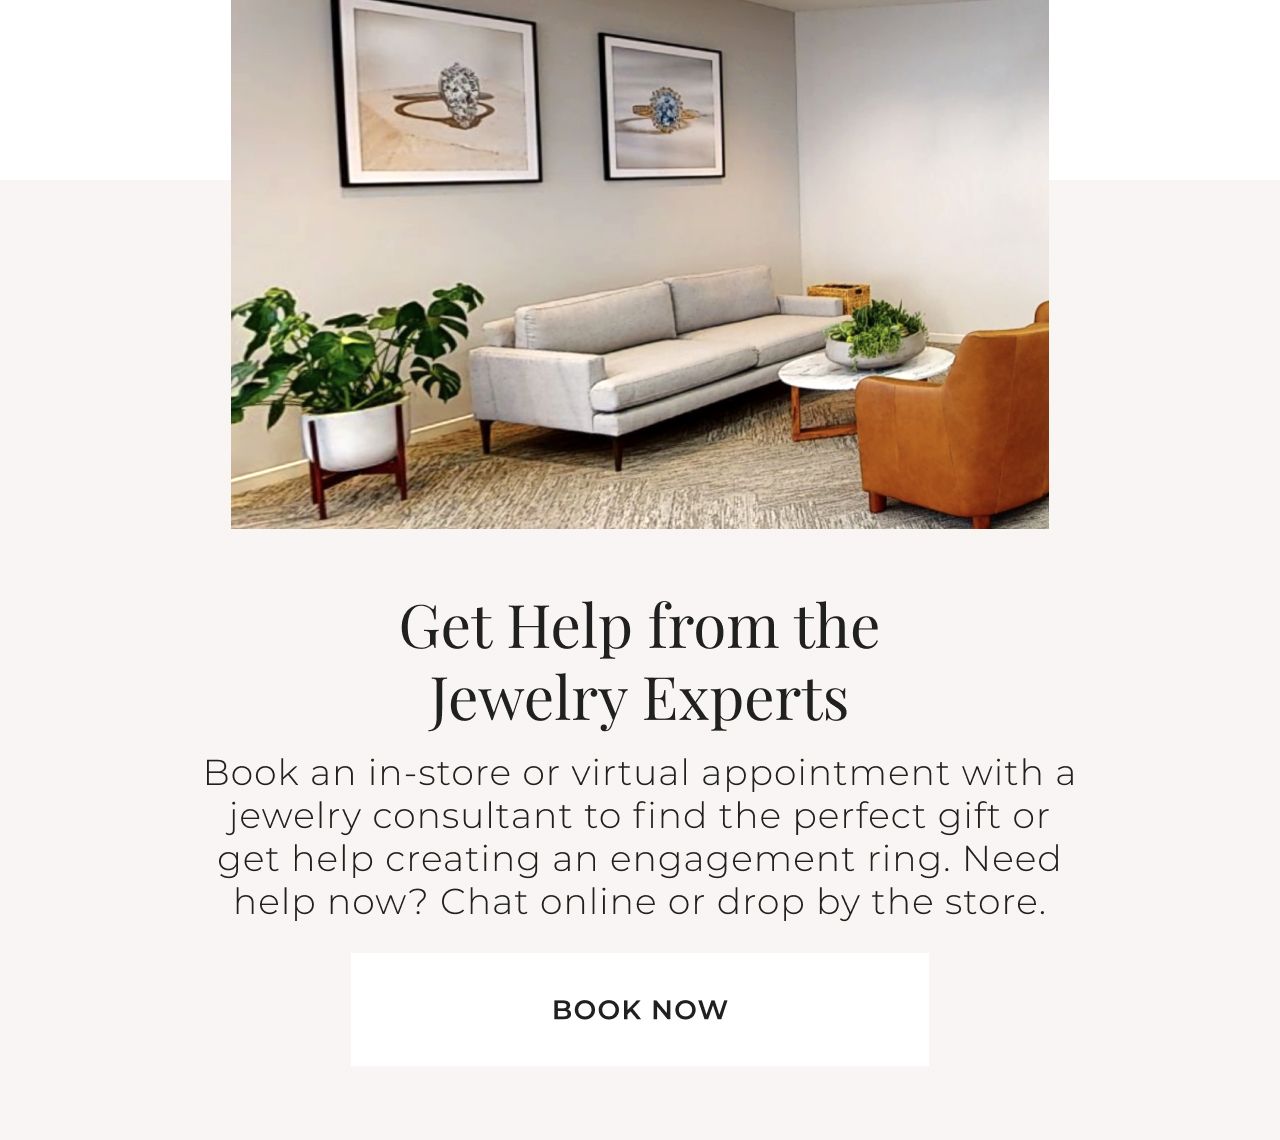 Get Help from the Jewelry Experts - Book an in-store or virtual appointment with a jewelry consultant to find the perfect gift or get help creating an engagement ring. Need help now? Chat online or drop by the store. Book Now >